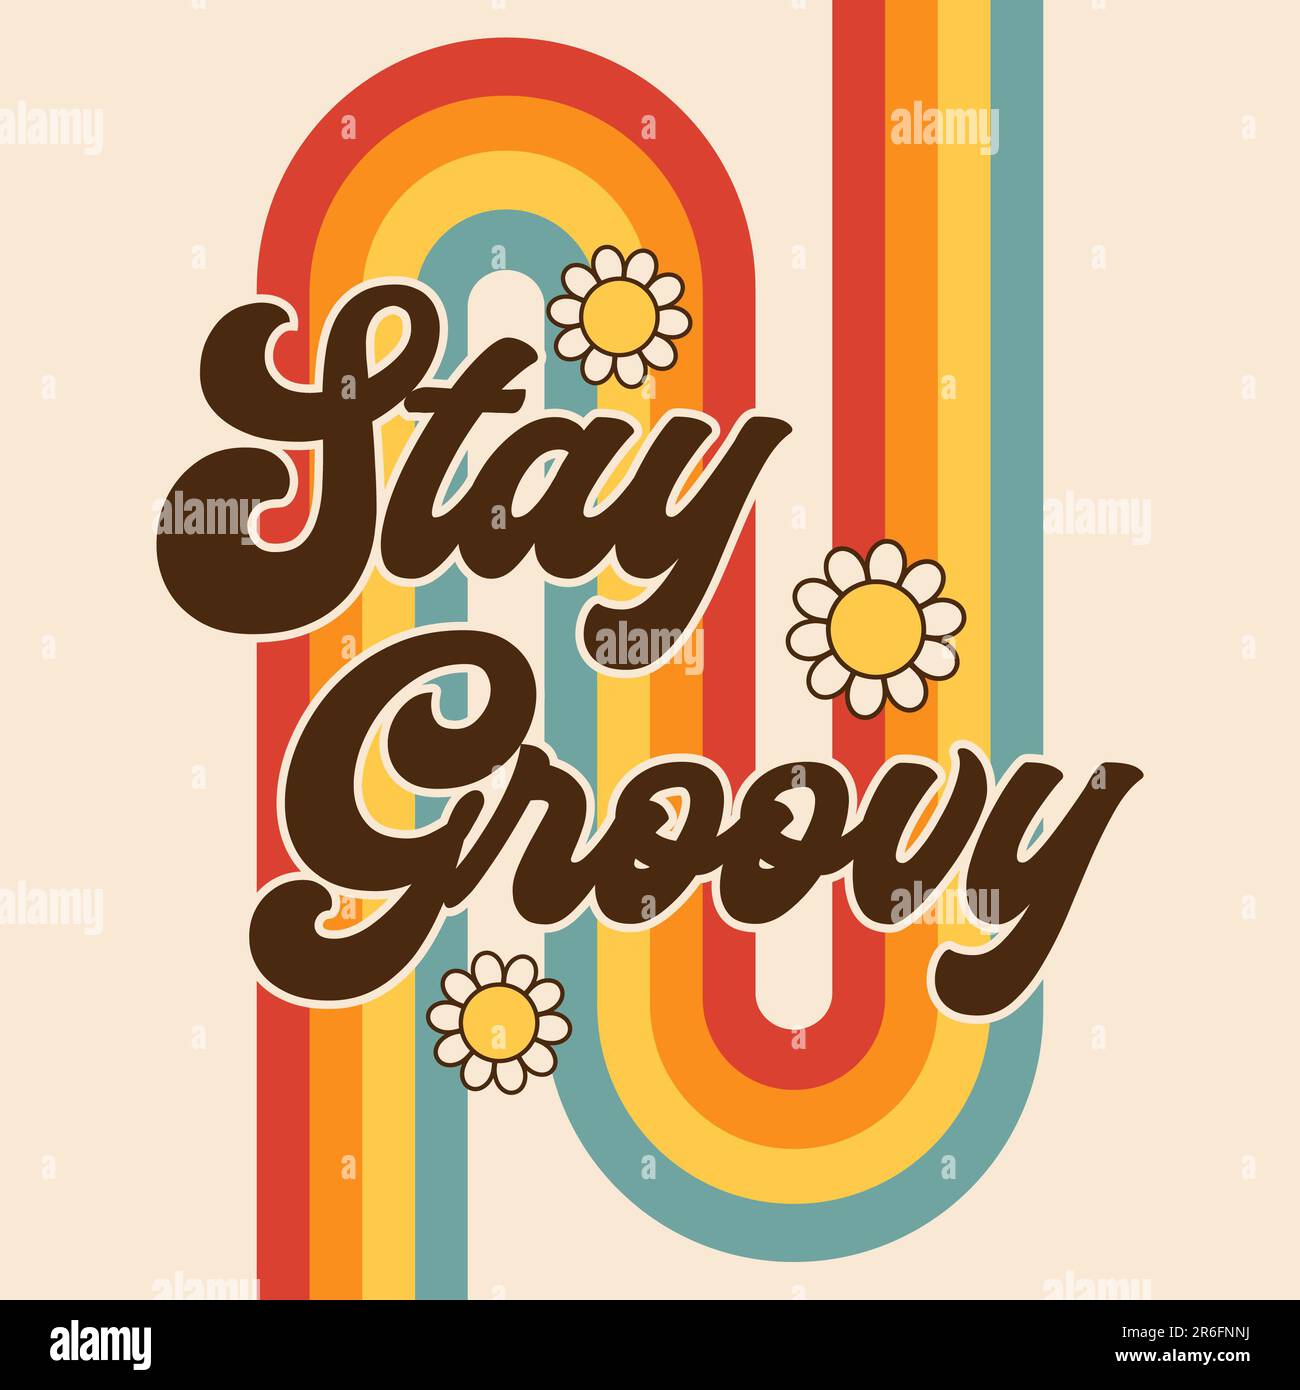 Stay Groovy Retro Rainbow Pattern with daisy flowers, Cool Boho Graphic Design illustration, 70s Vintage Style type font, fun positive phrase or sayin Stock Photo